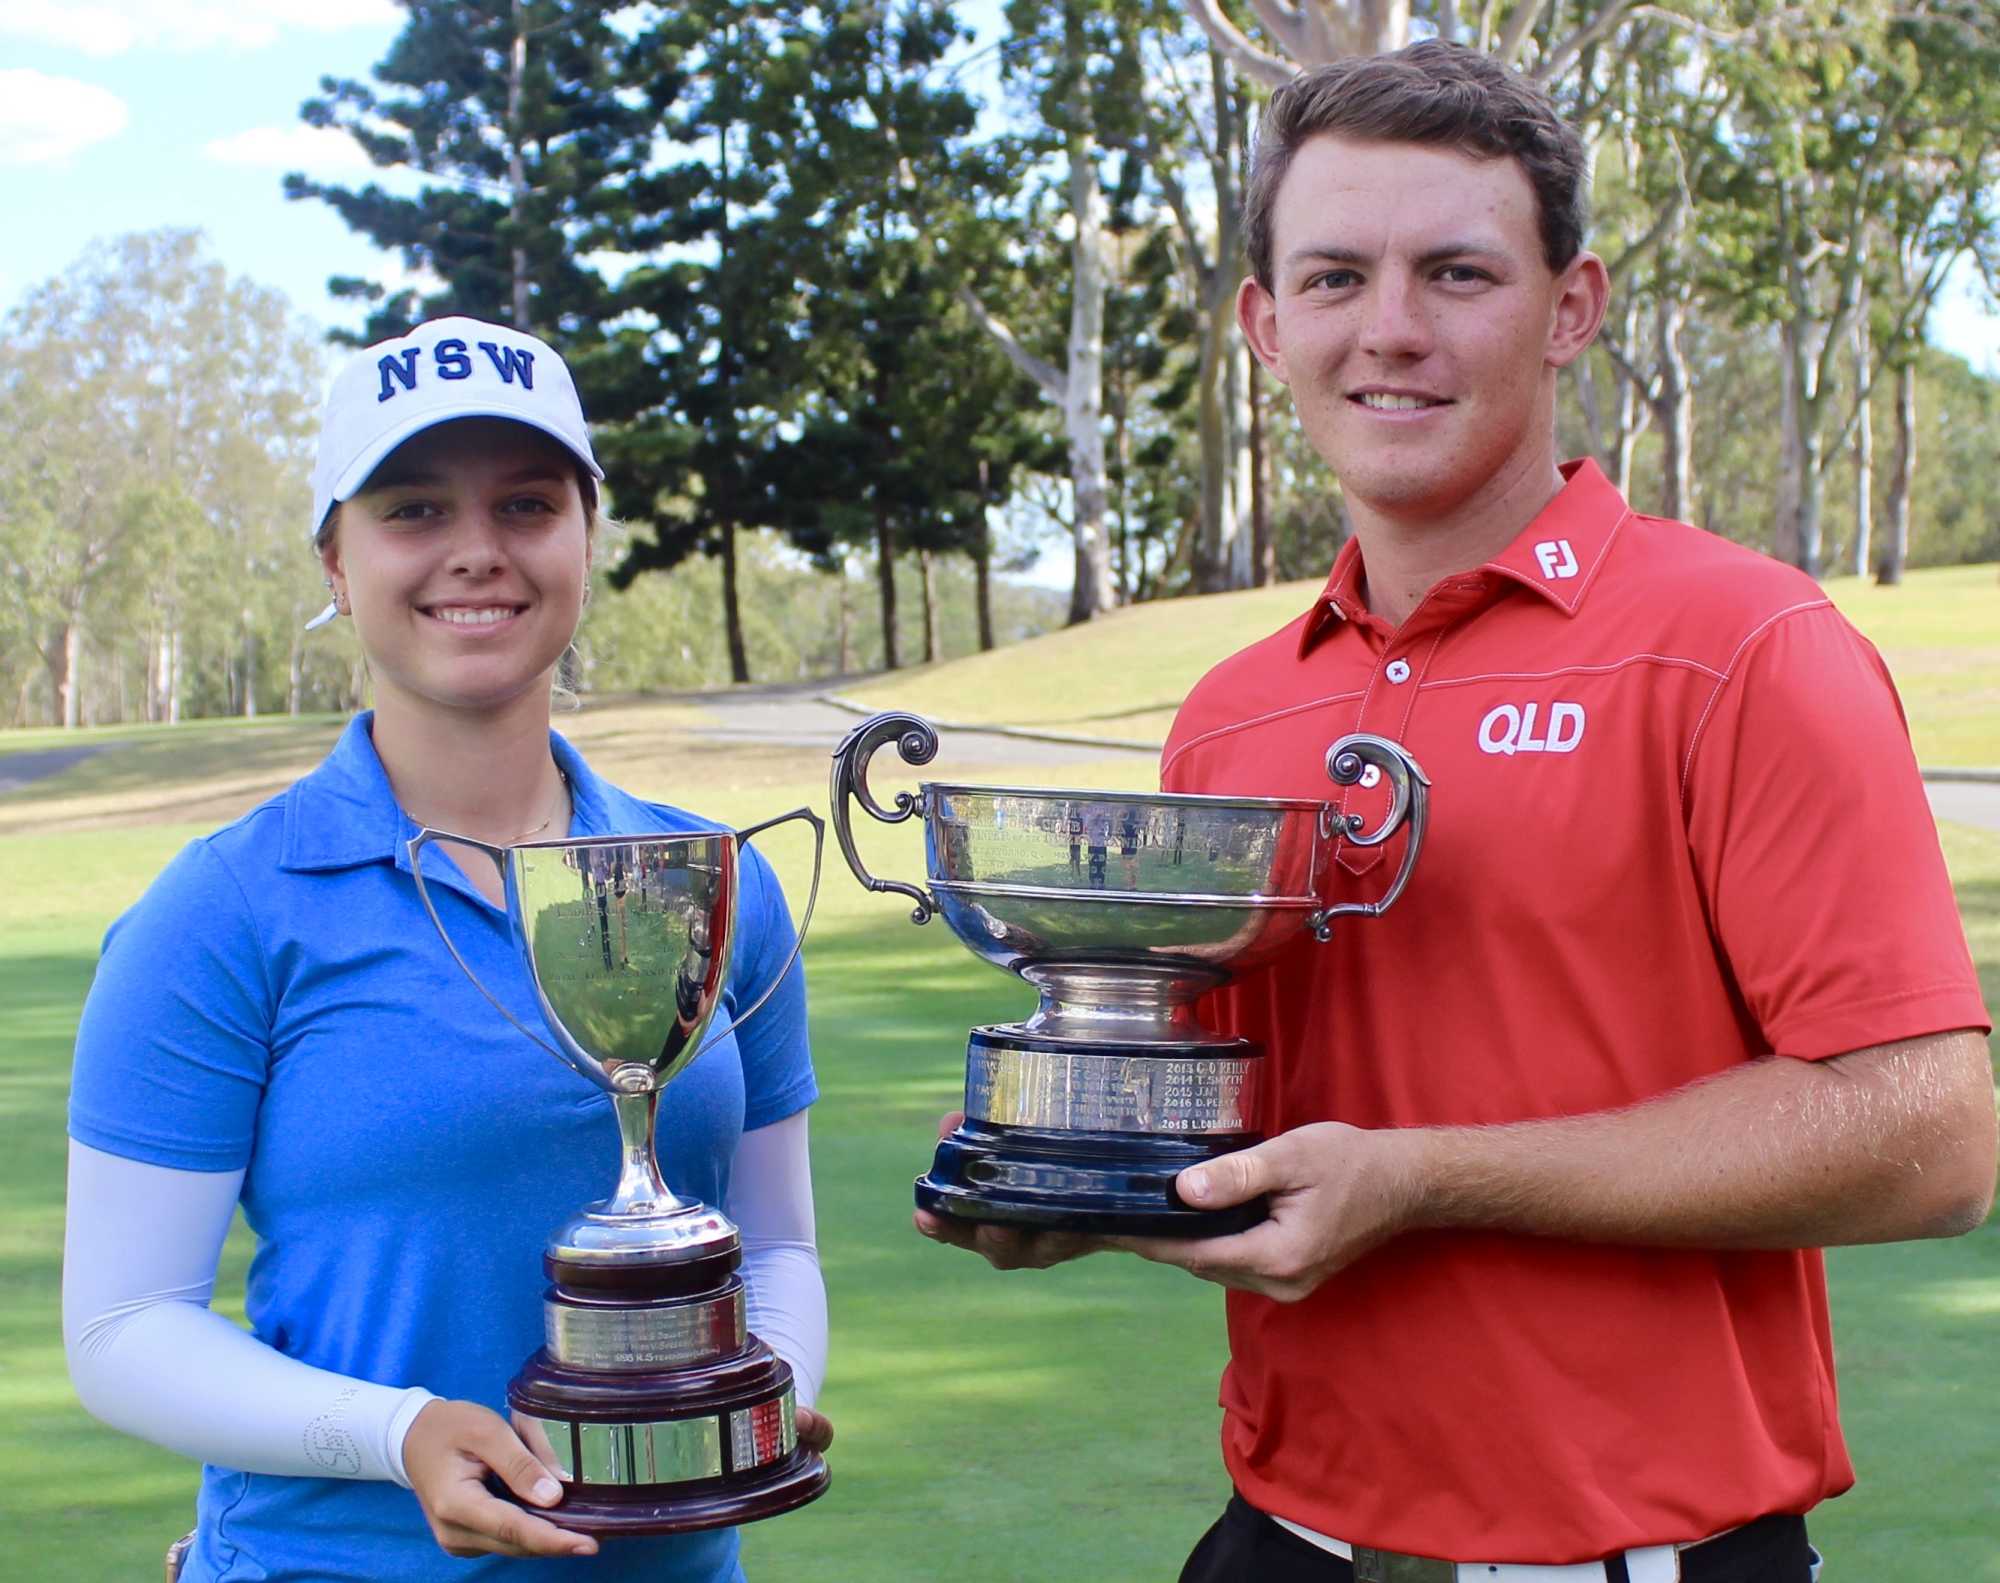 2019 Queensland Amateur winners - Steph Kyriacou and Lewis Hoath